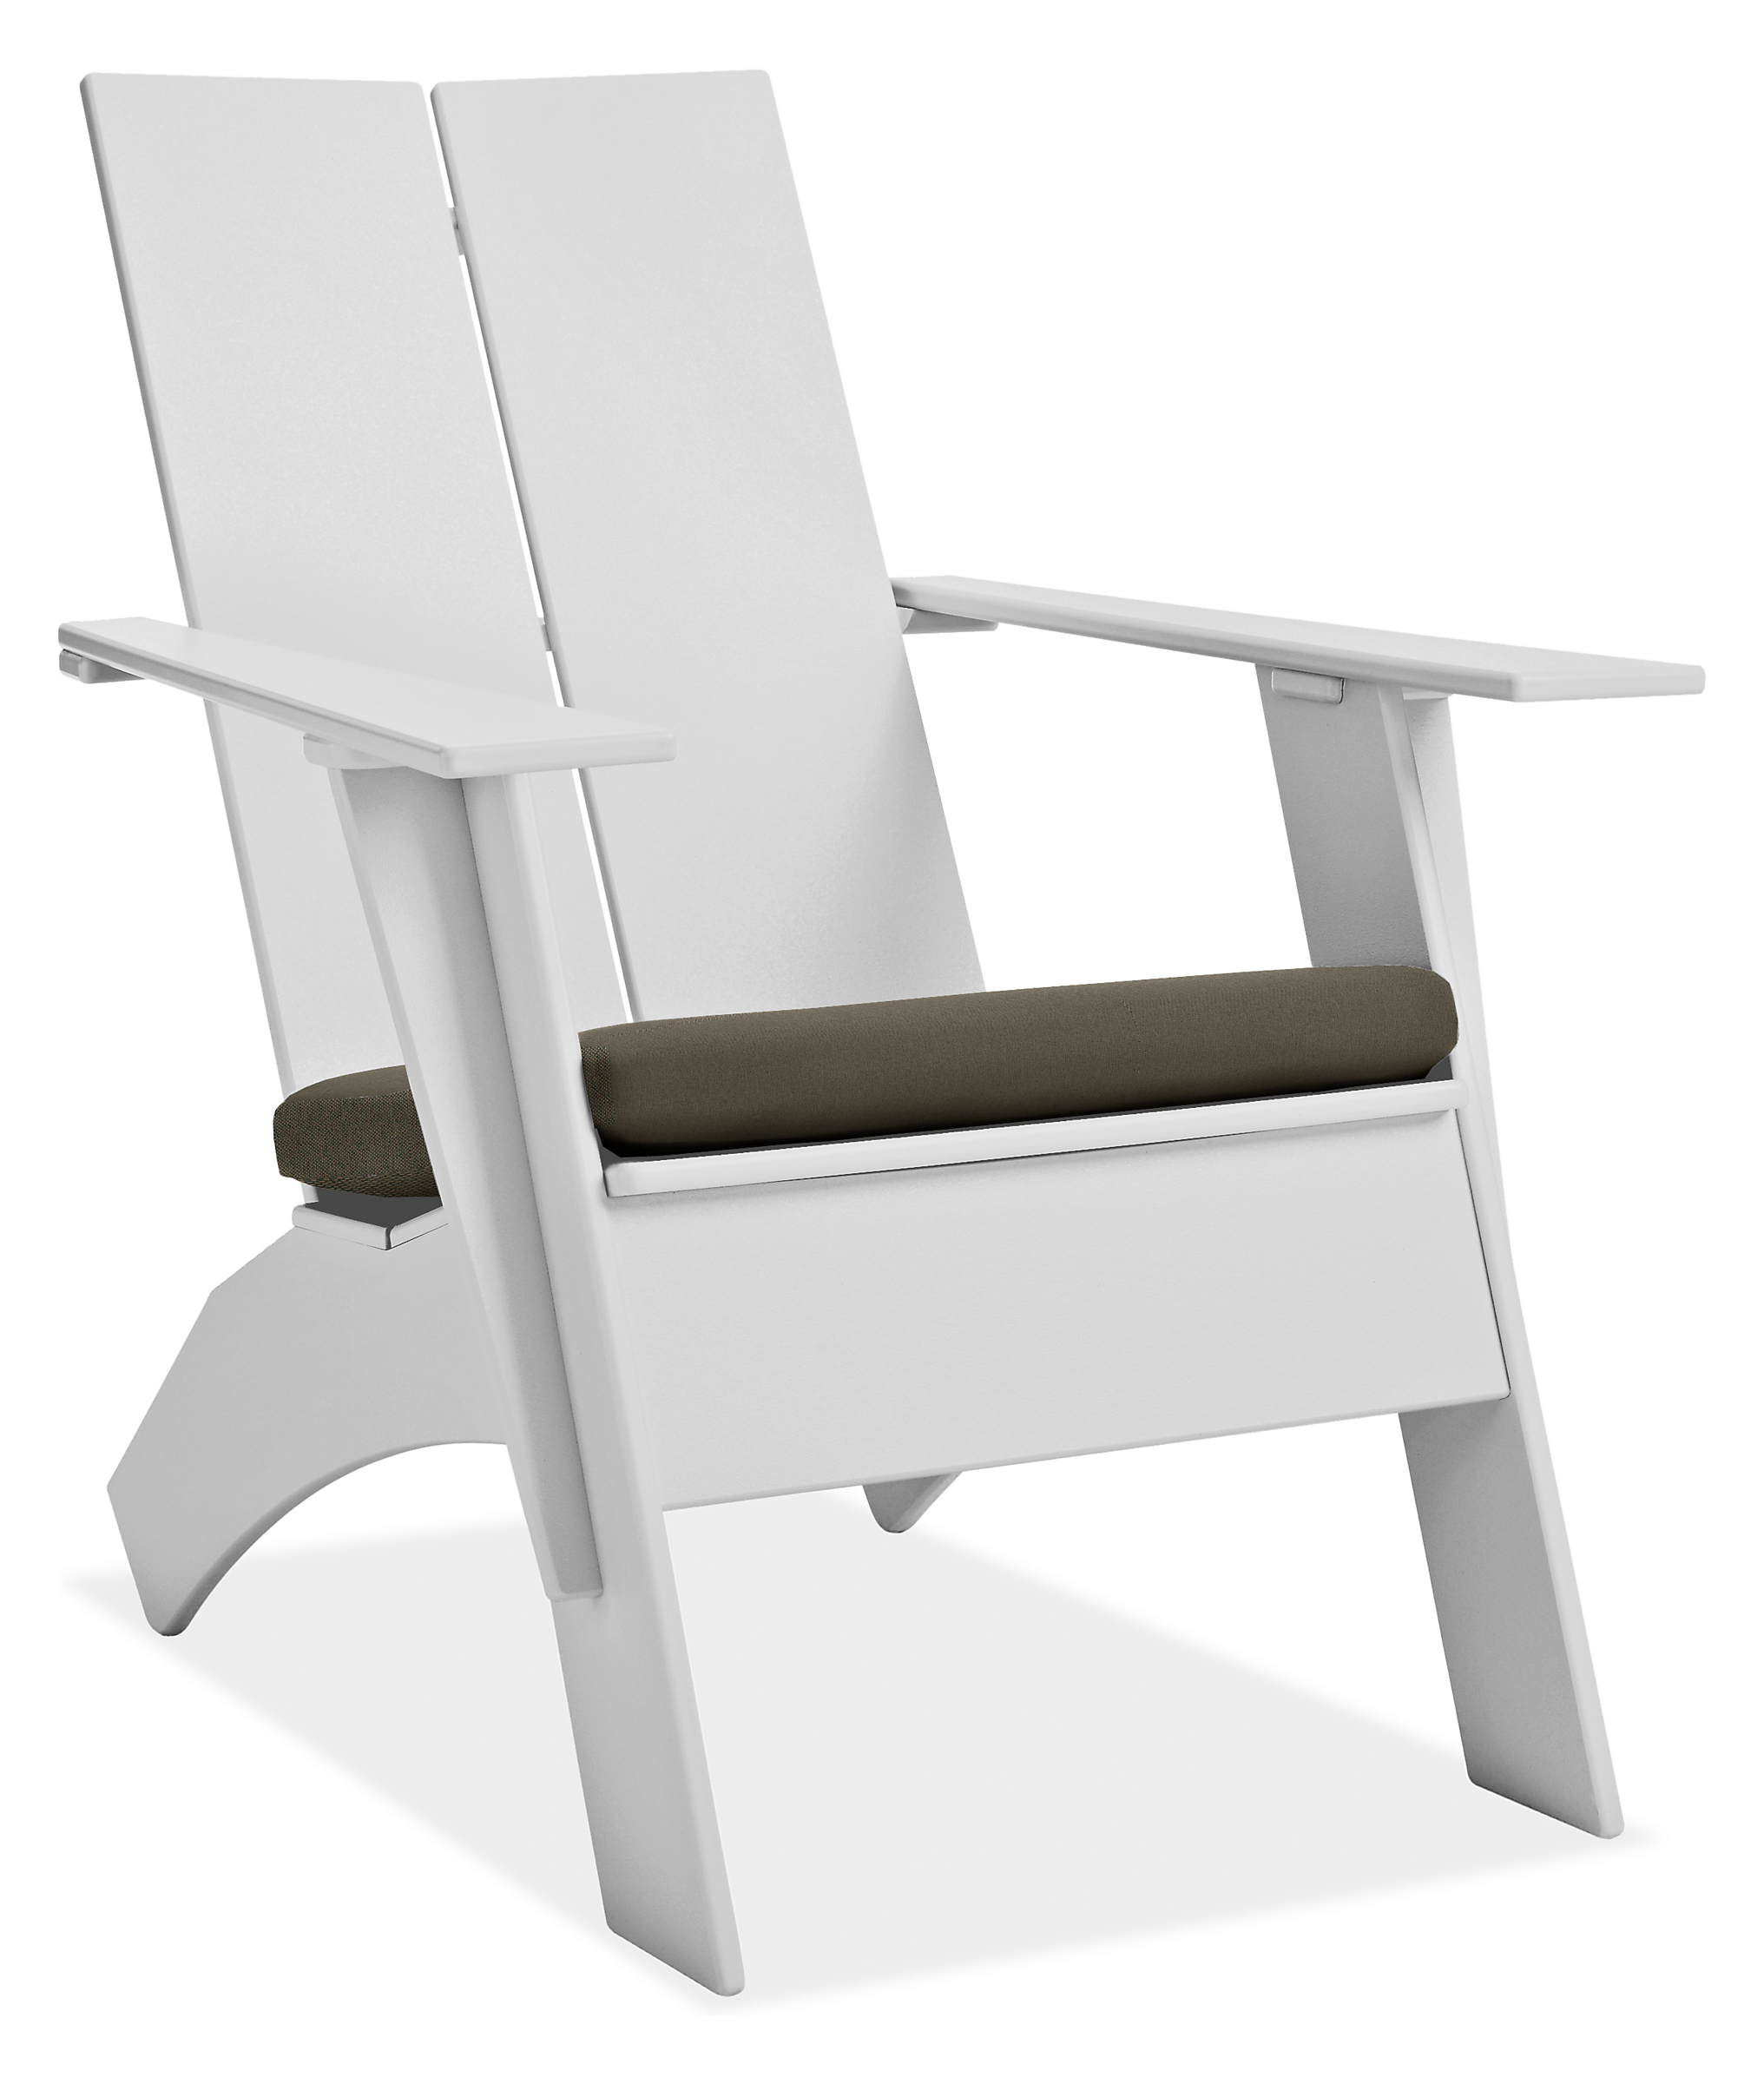 Emmet Tall Lounge Chair with Cushion